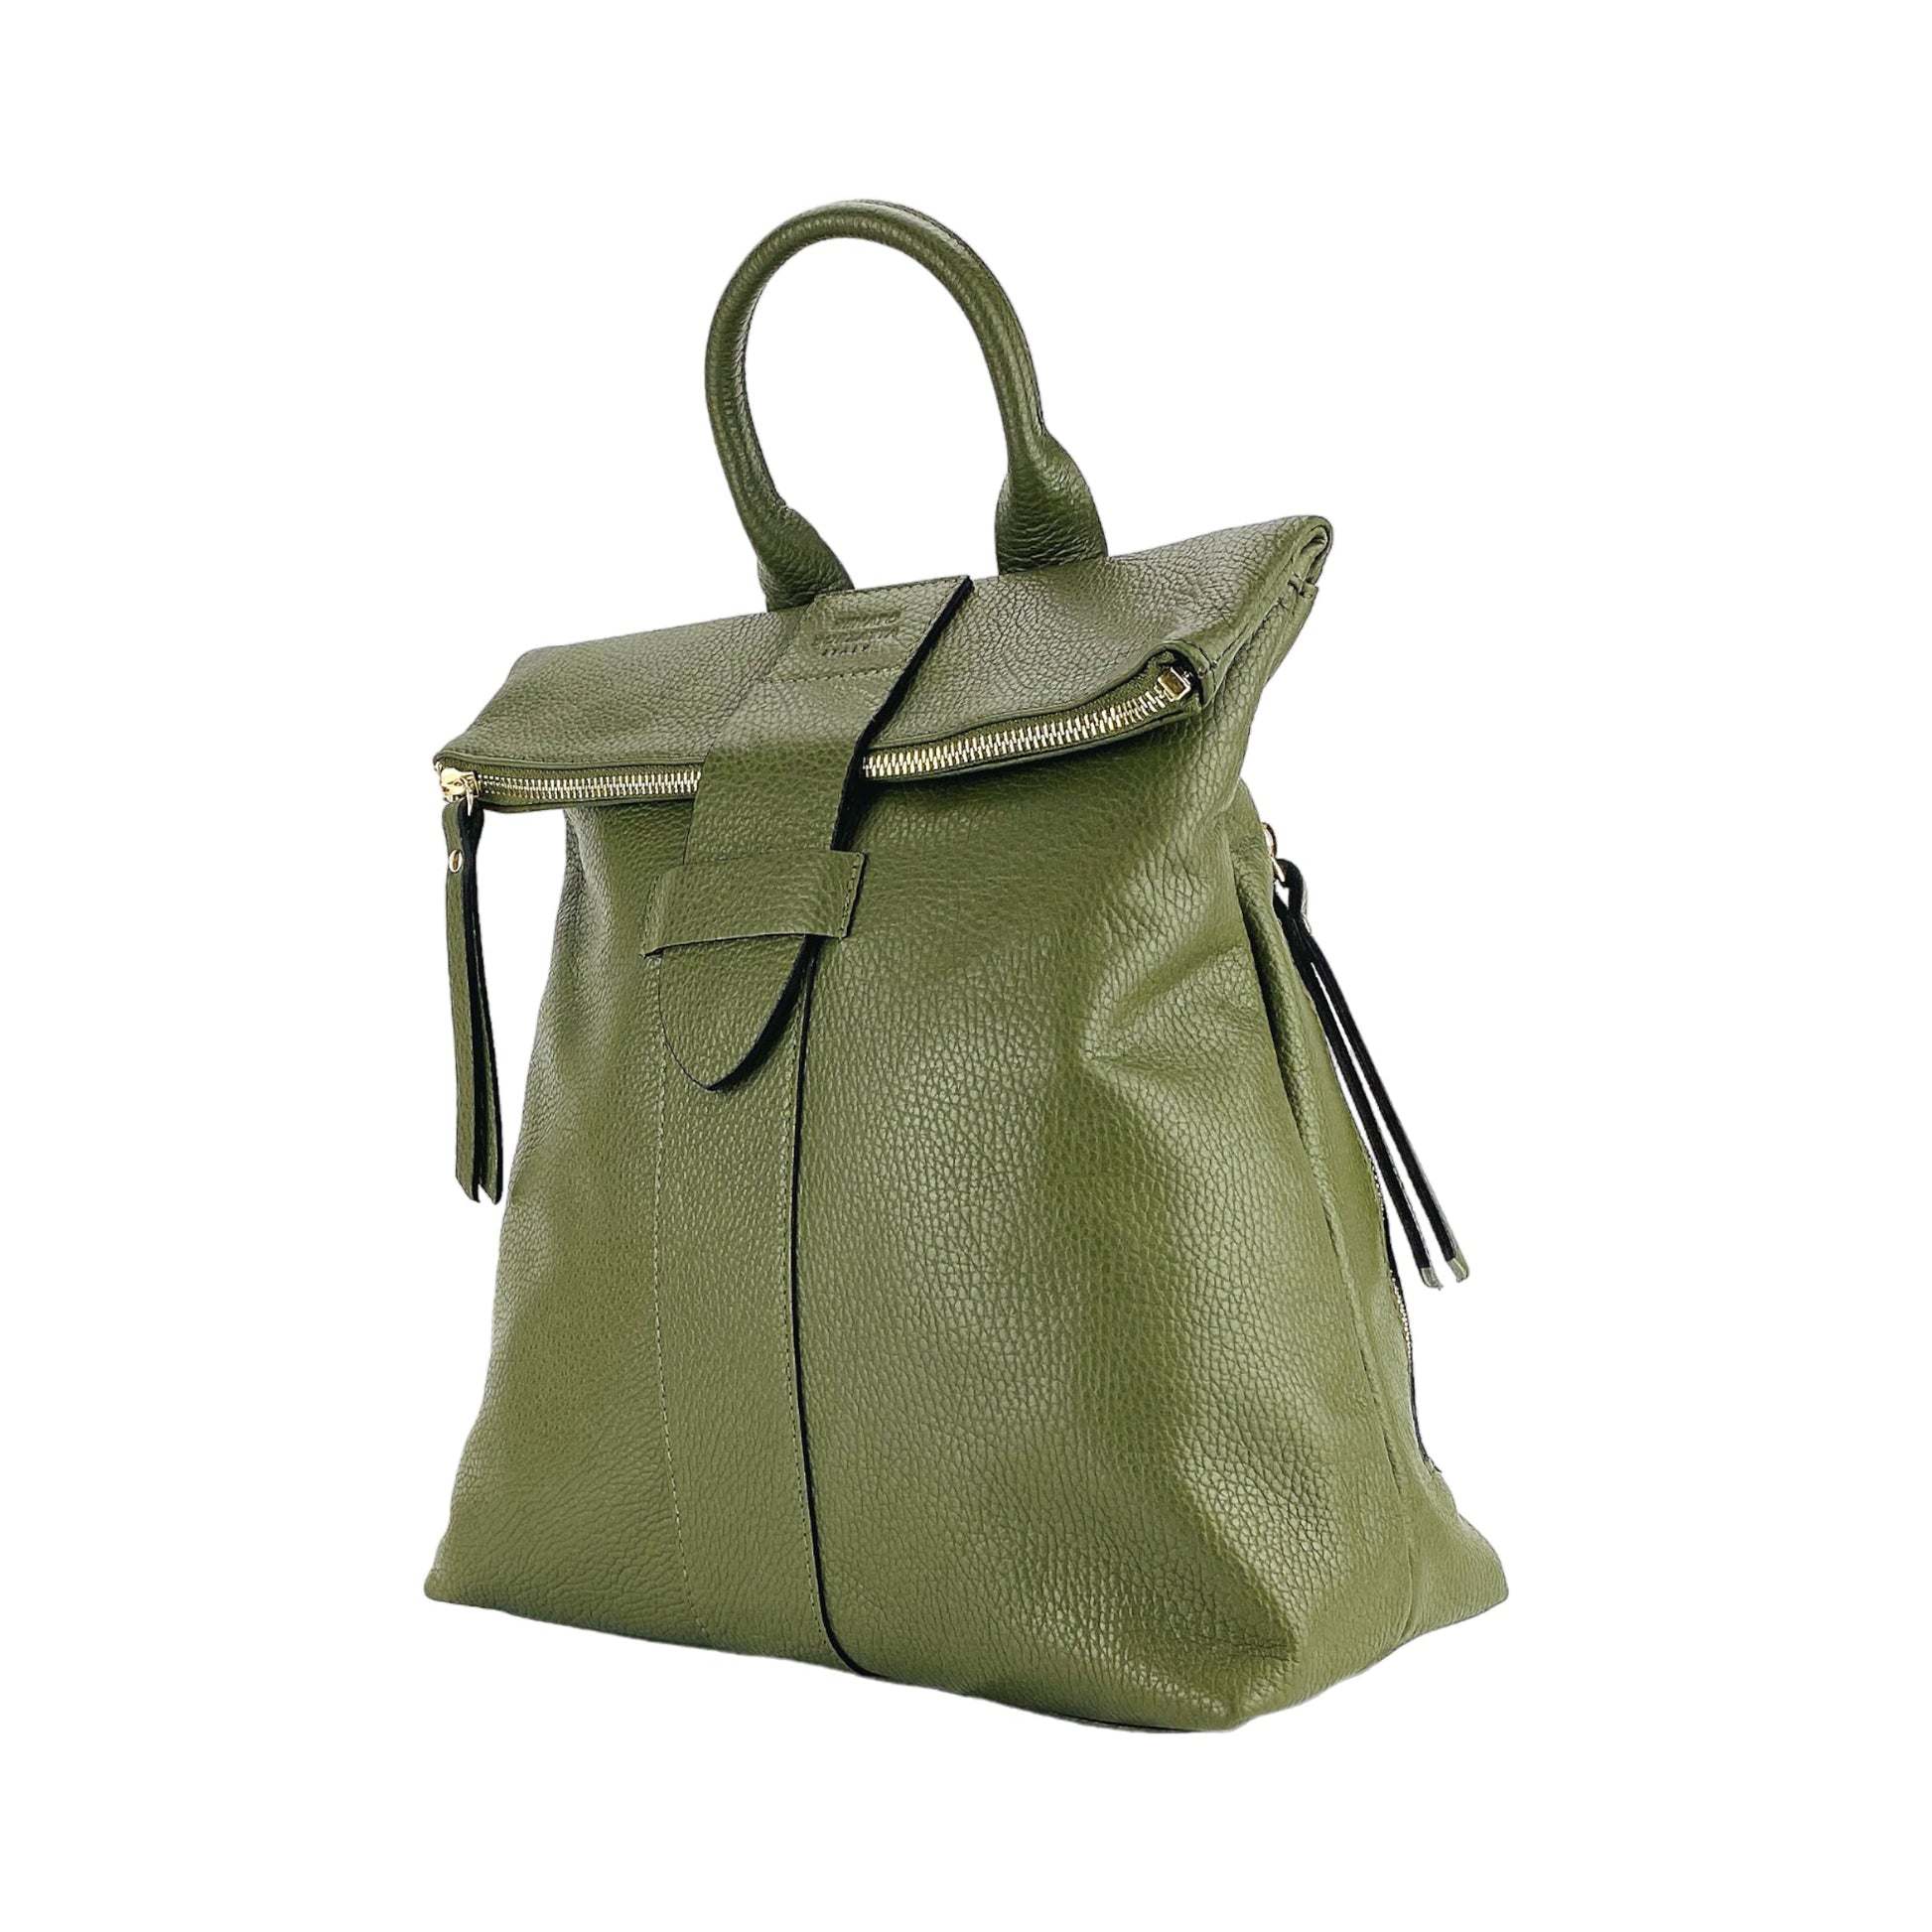 RB1021E | Soft women's backpack in genuine leather Made in Italy with adjustable shoulder straps. Zipper and accessories in shiny gold metal - Green color - Dimensions: 30 x 34 x 10.5 cm-1